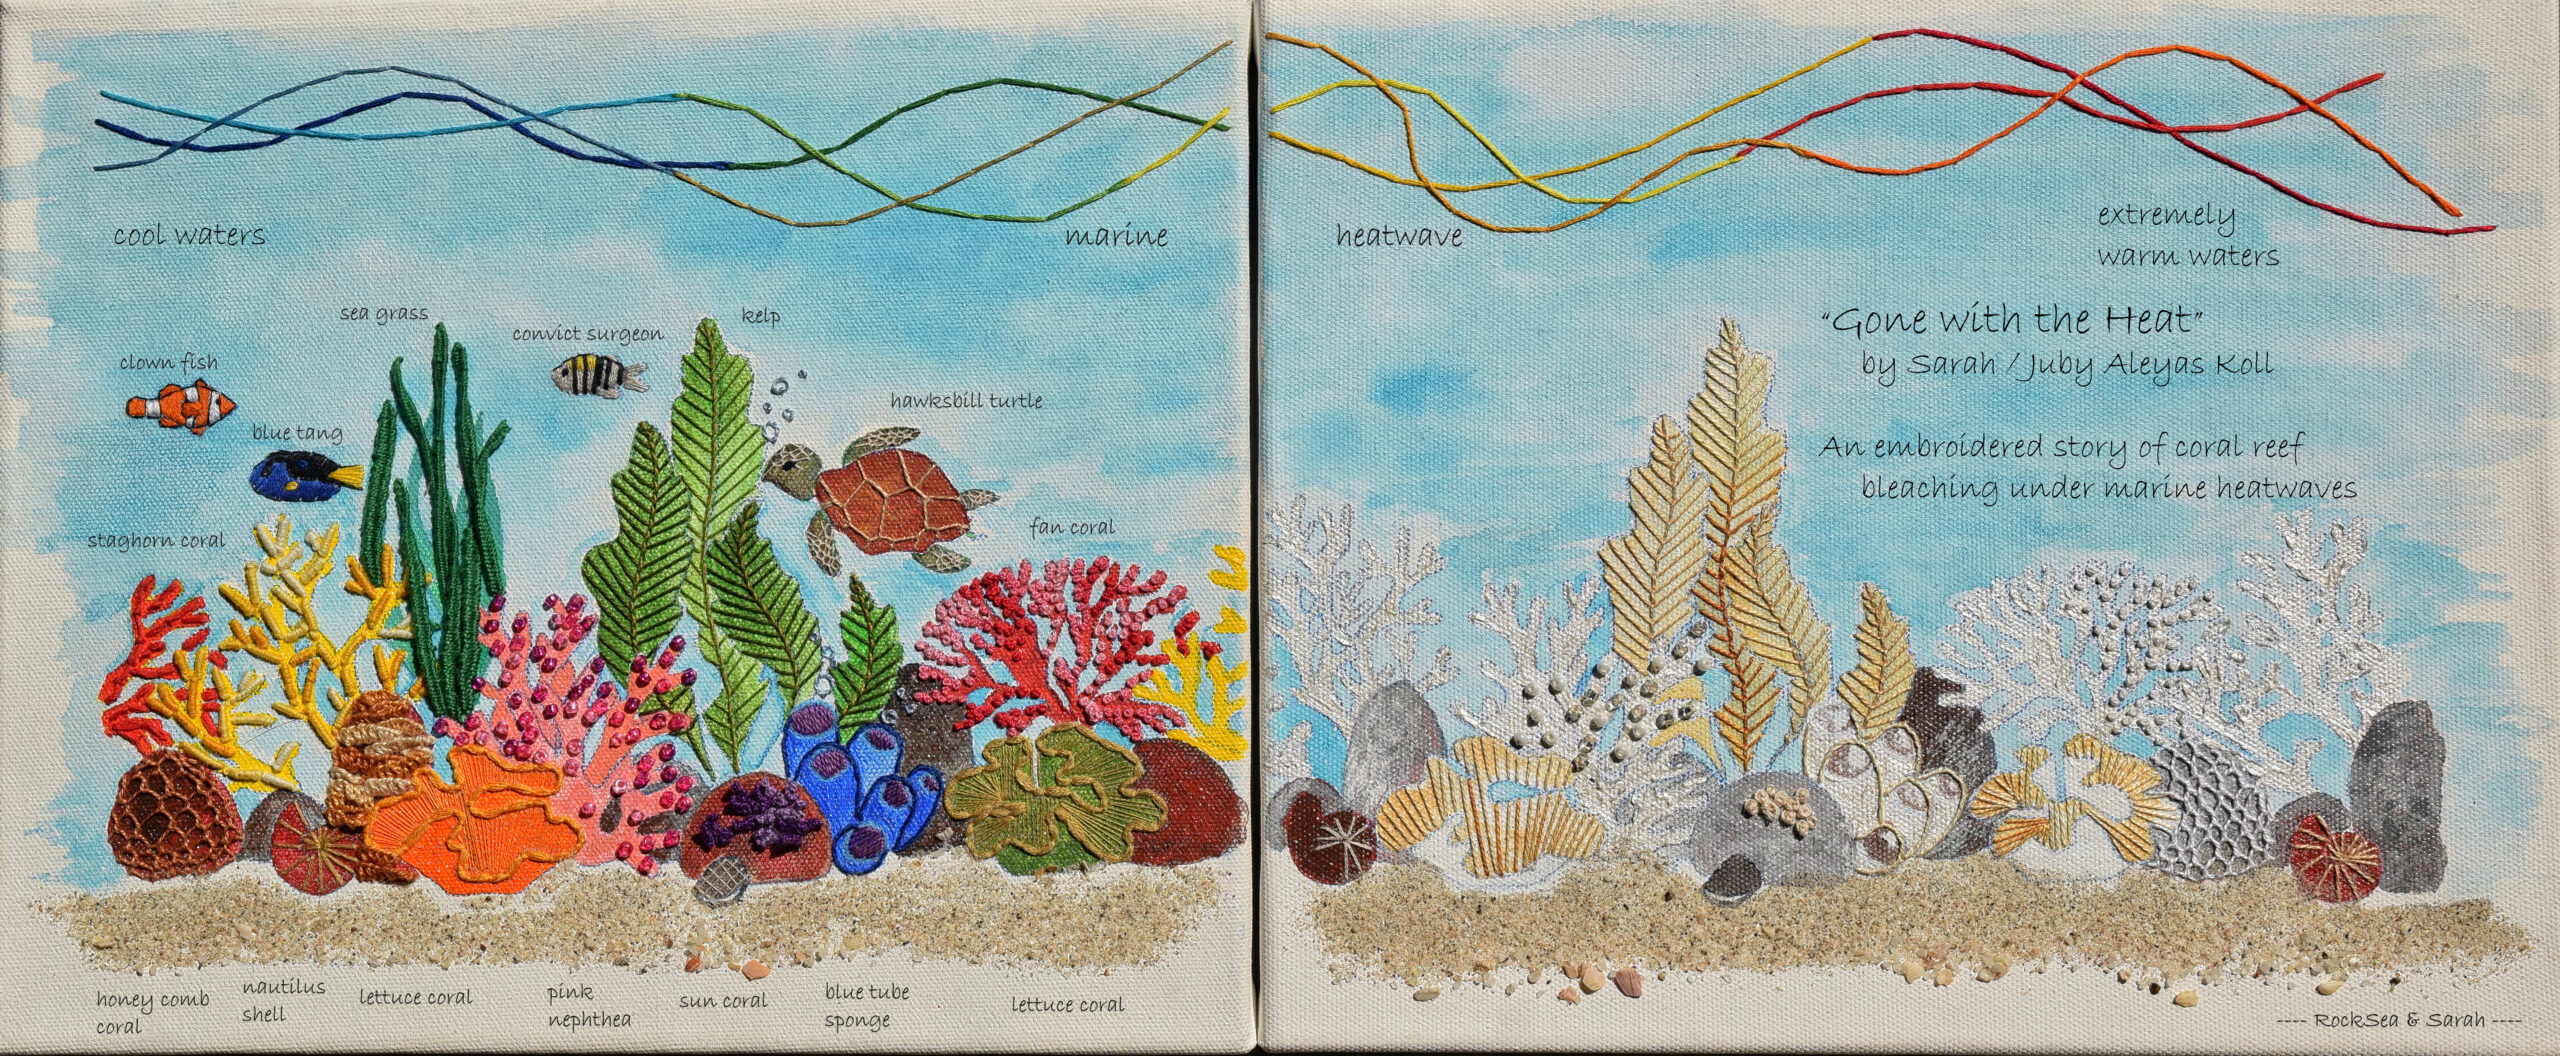 "Gone with the Heat", an embroidered story of coral reef bleaching under marine heatwaves, at the International Indian Ocean Science Conference 2024, Lombok, Indonesia